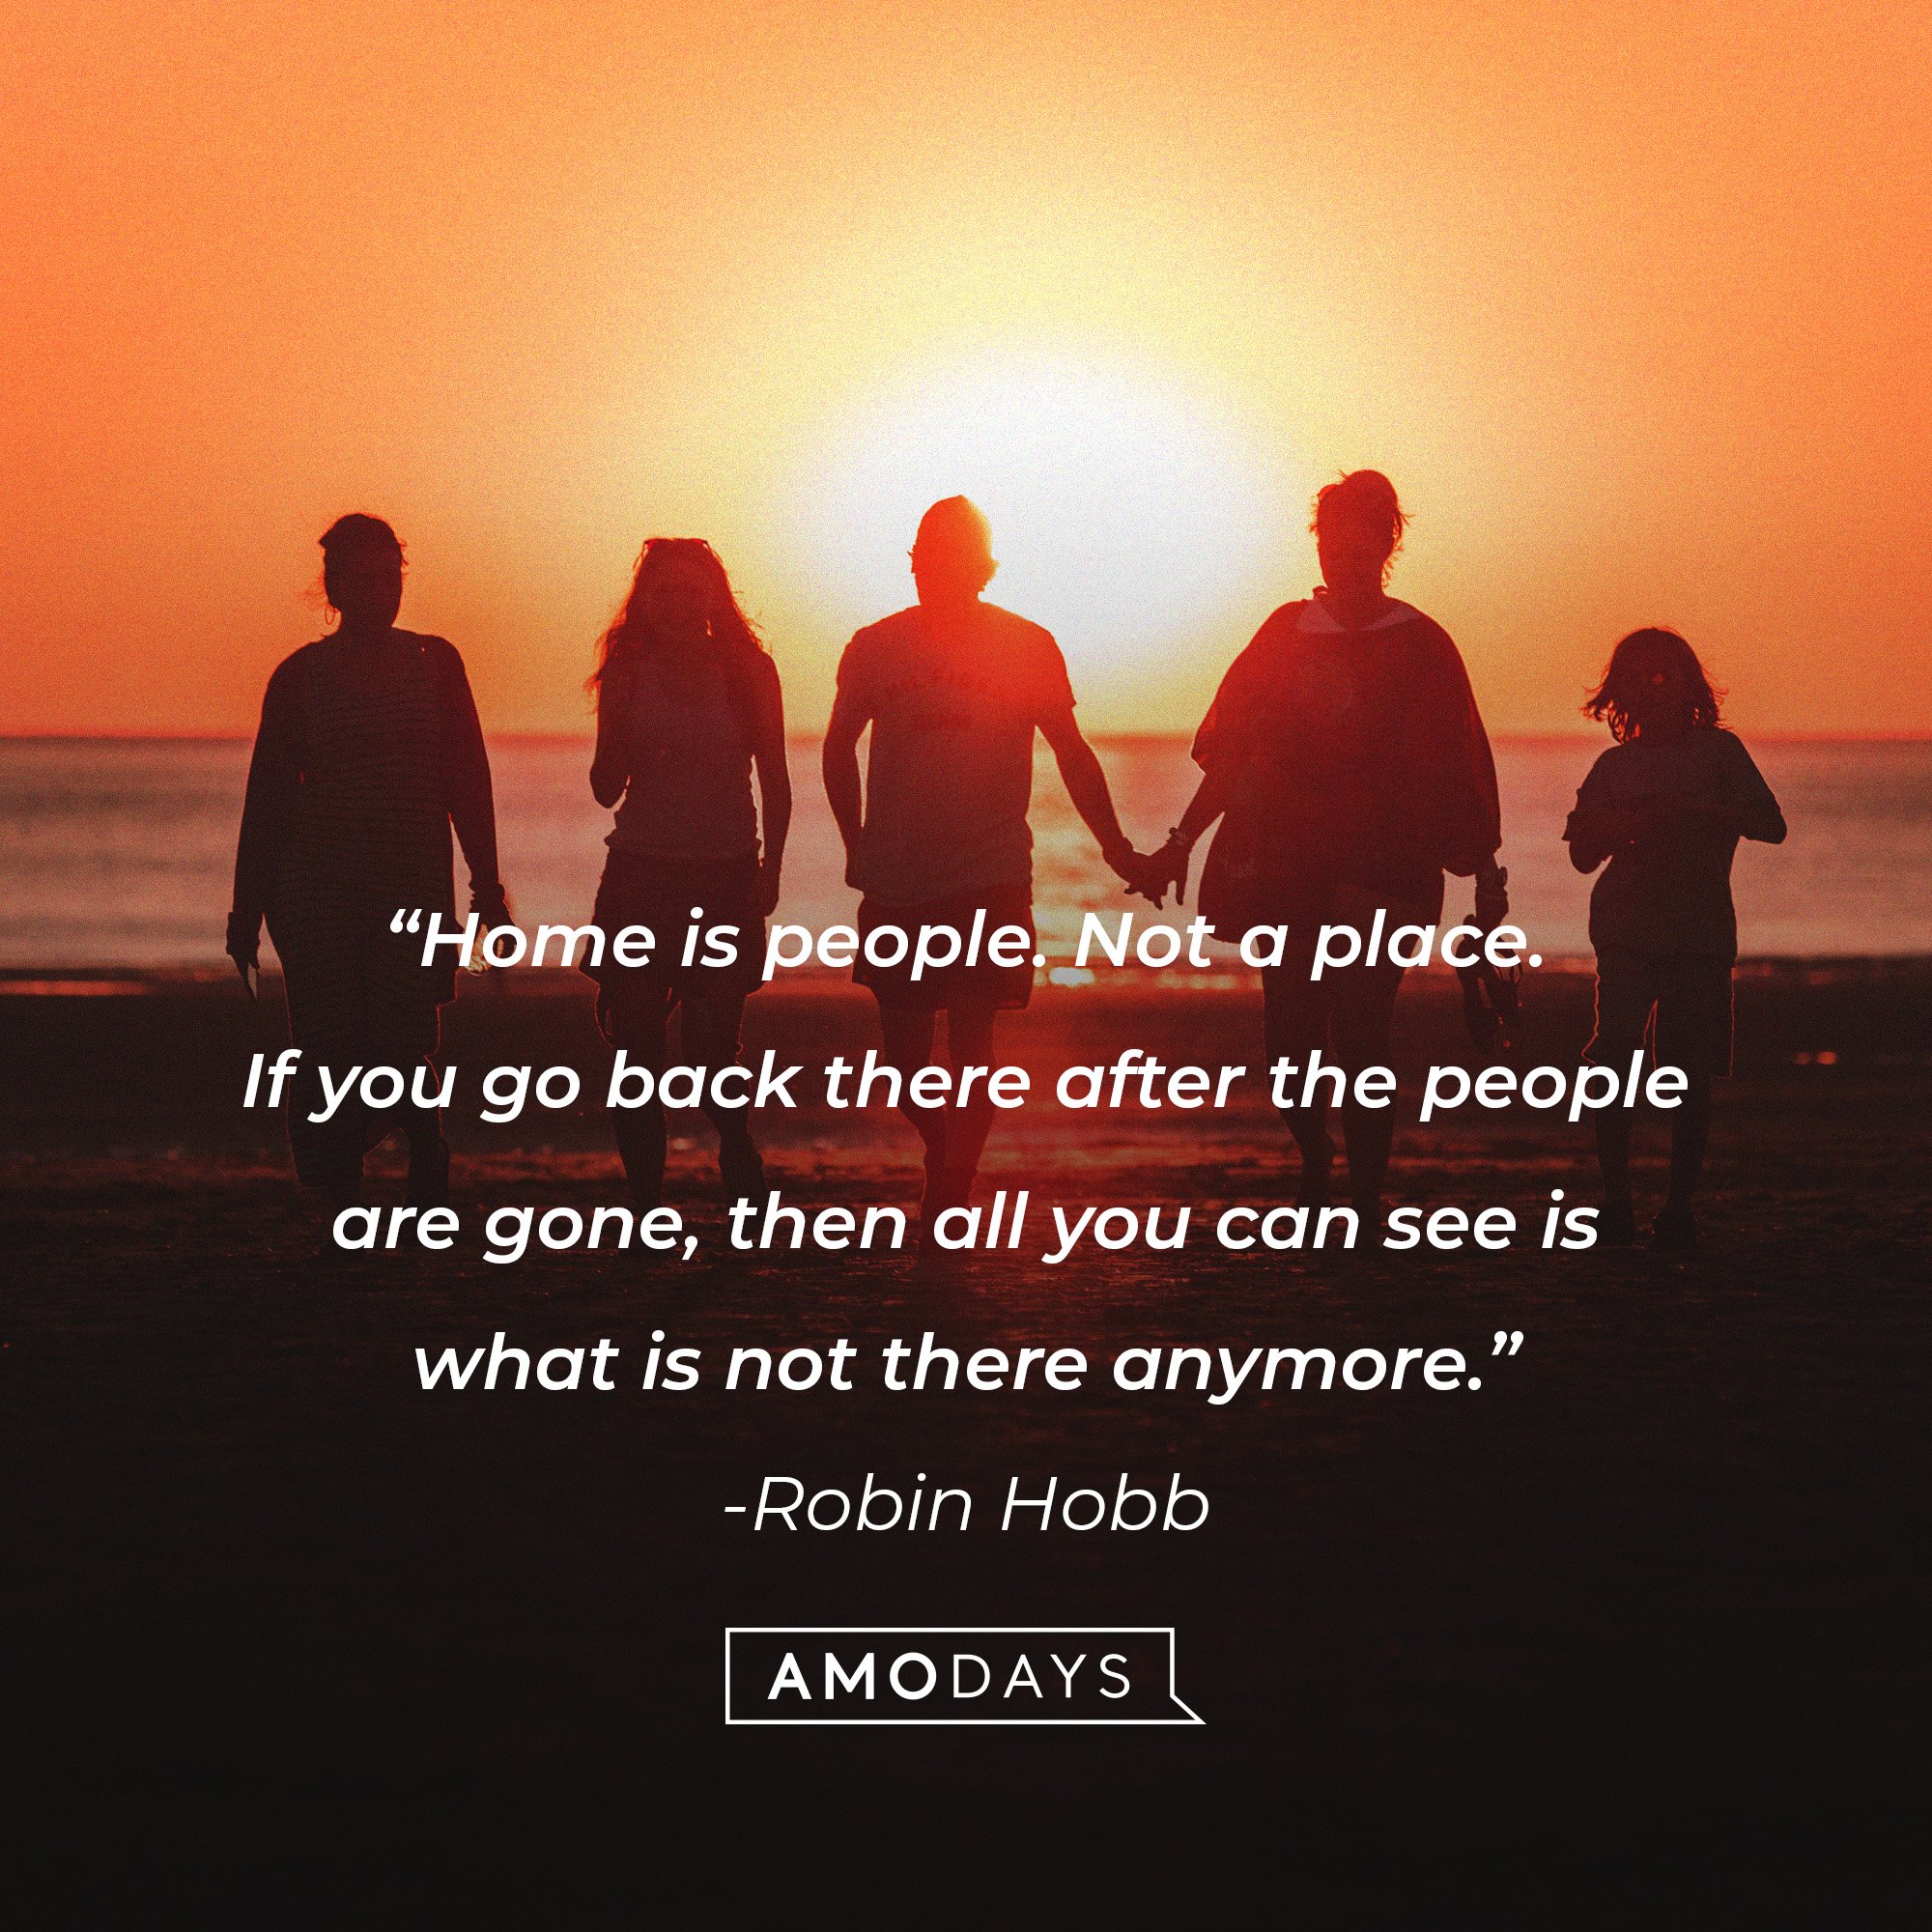 Robin Hobb's quote: “Home is people. Not a place. If you go back there after the people are gone, then all you can see is what is not there anymore.” | Image: AmoDays